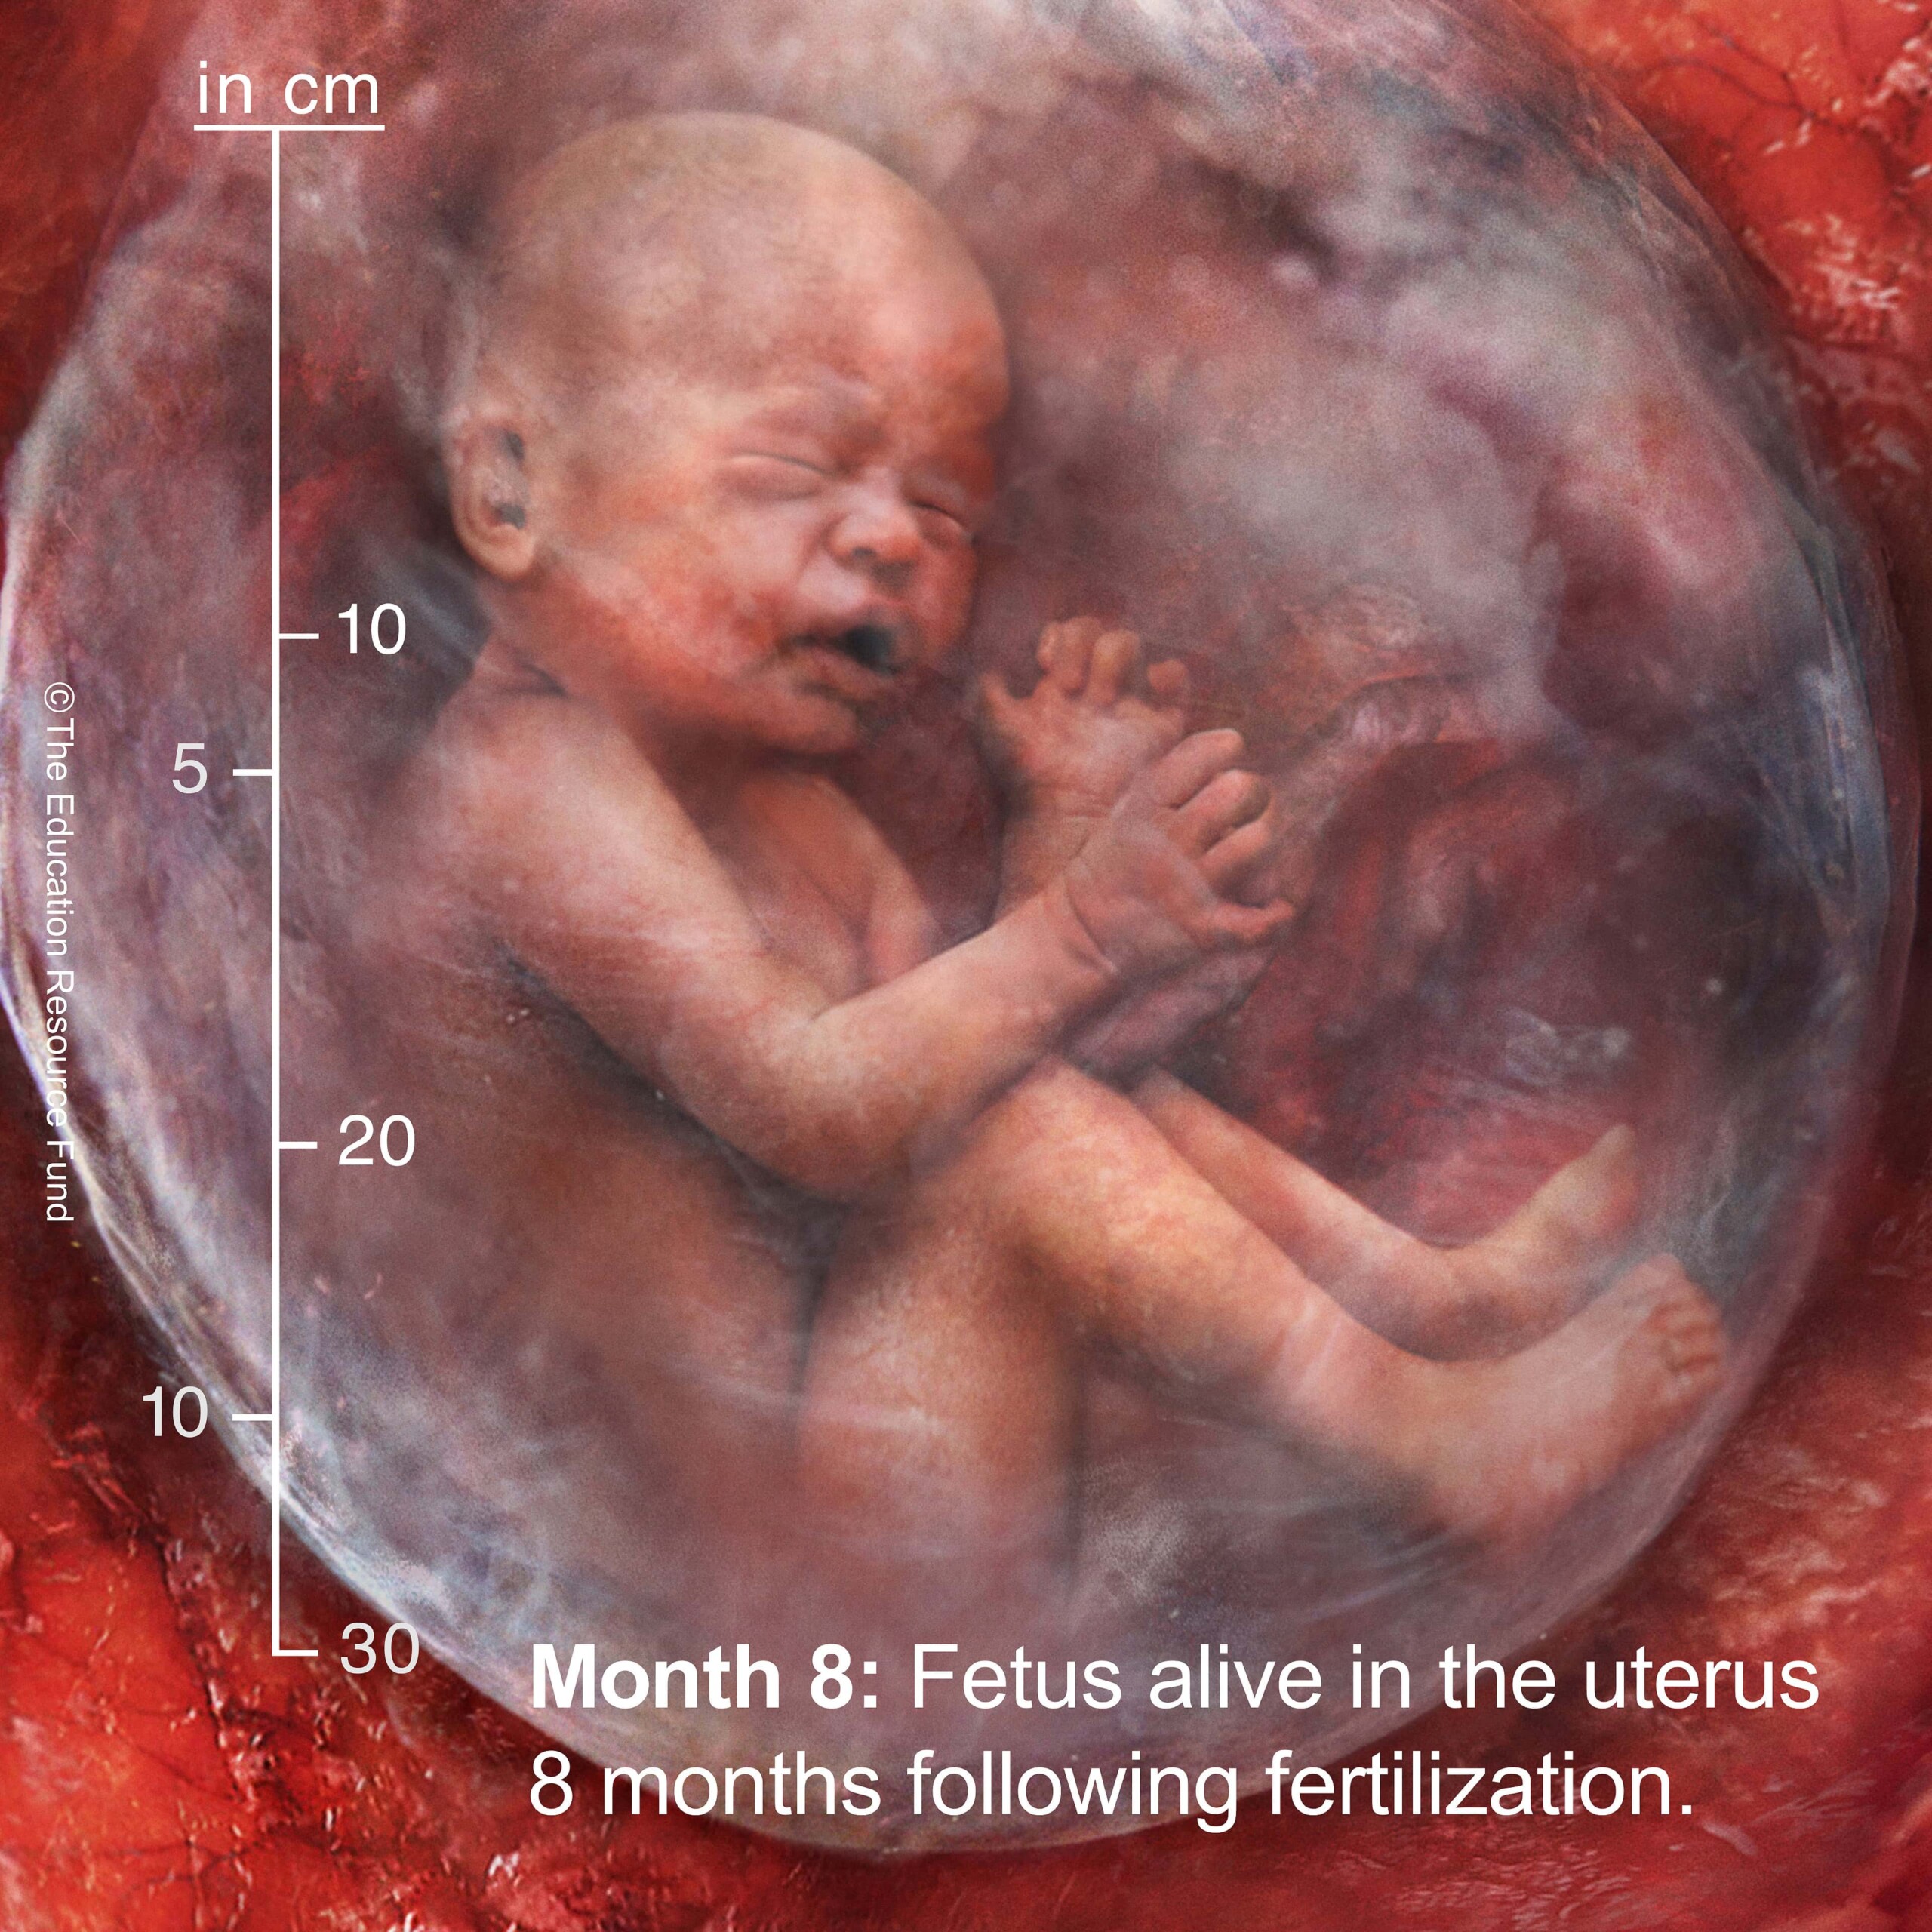 Month 8: Embryo alive in the uterus 8 months following fertilization